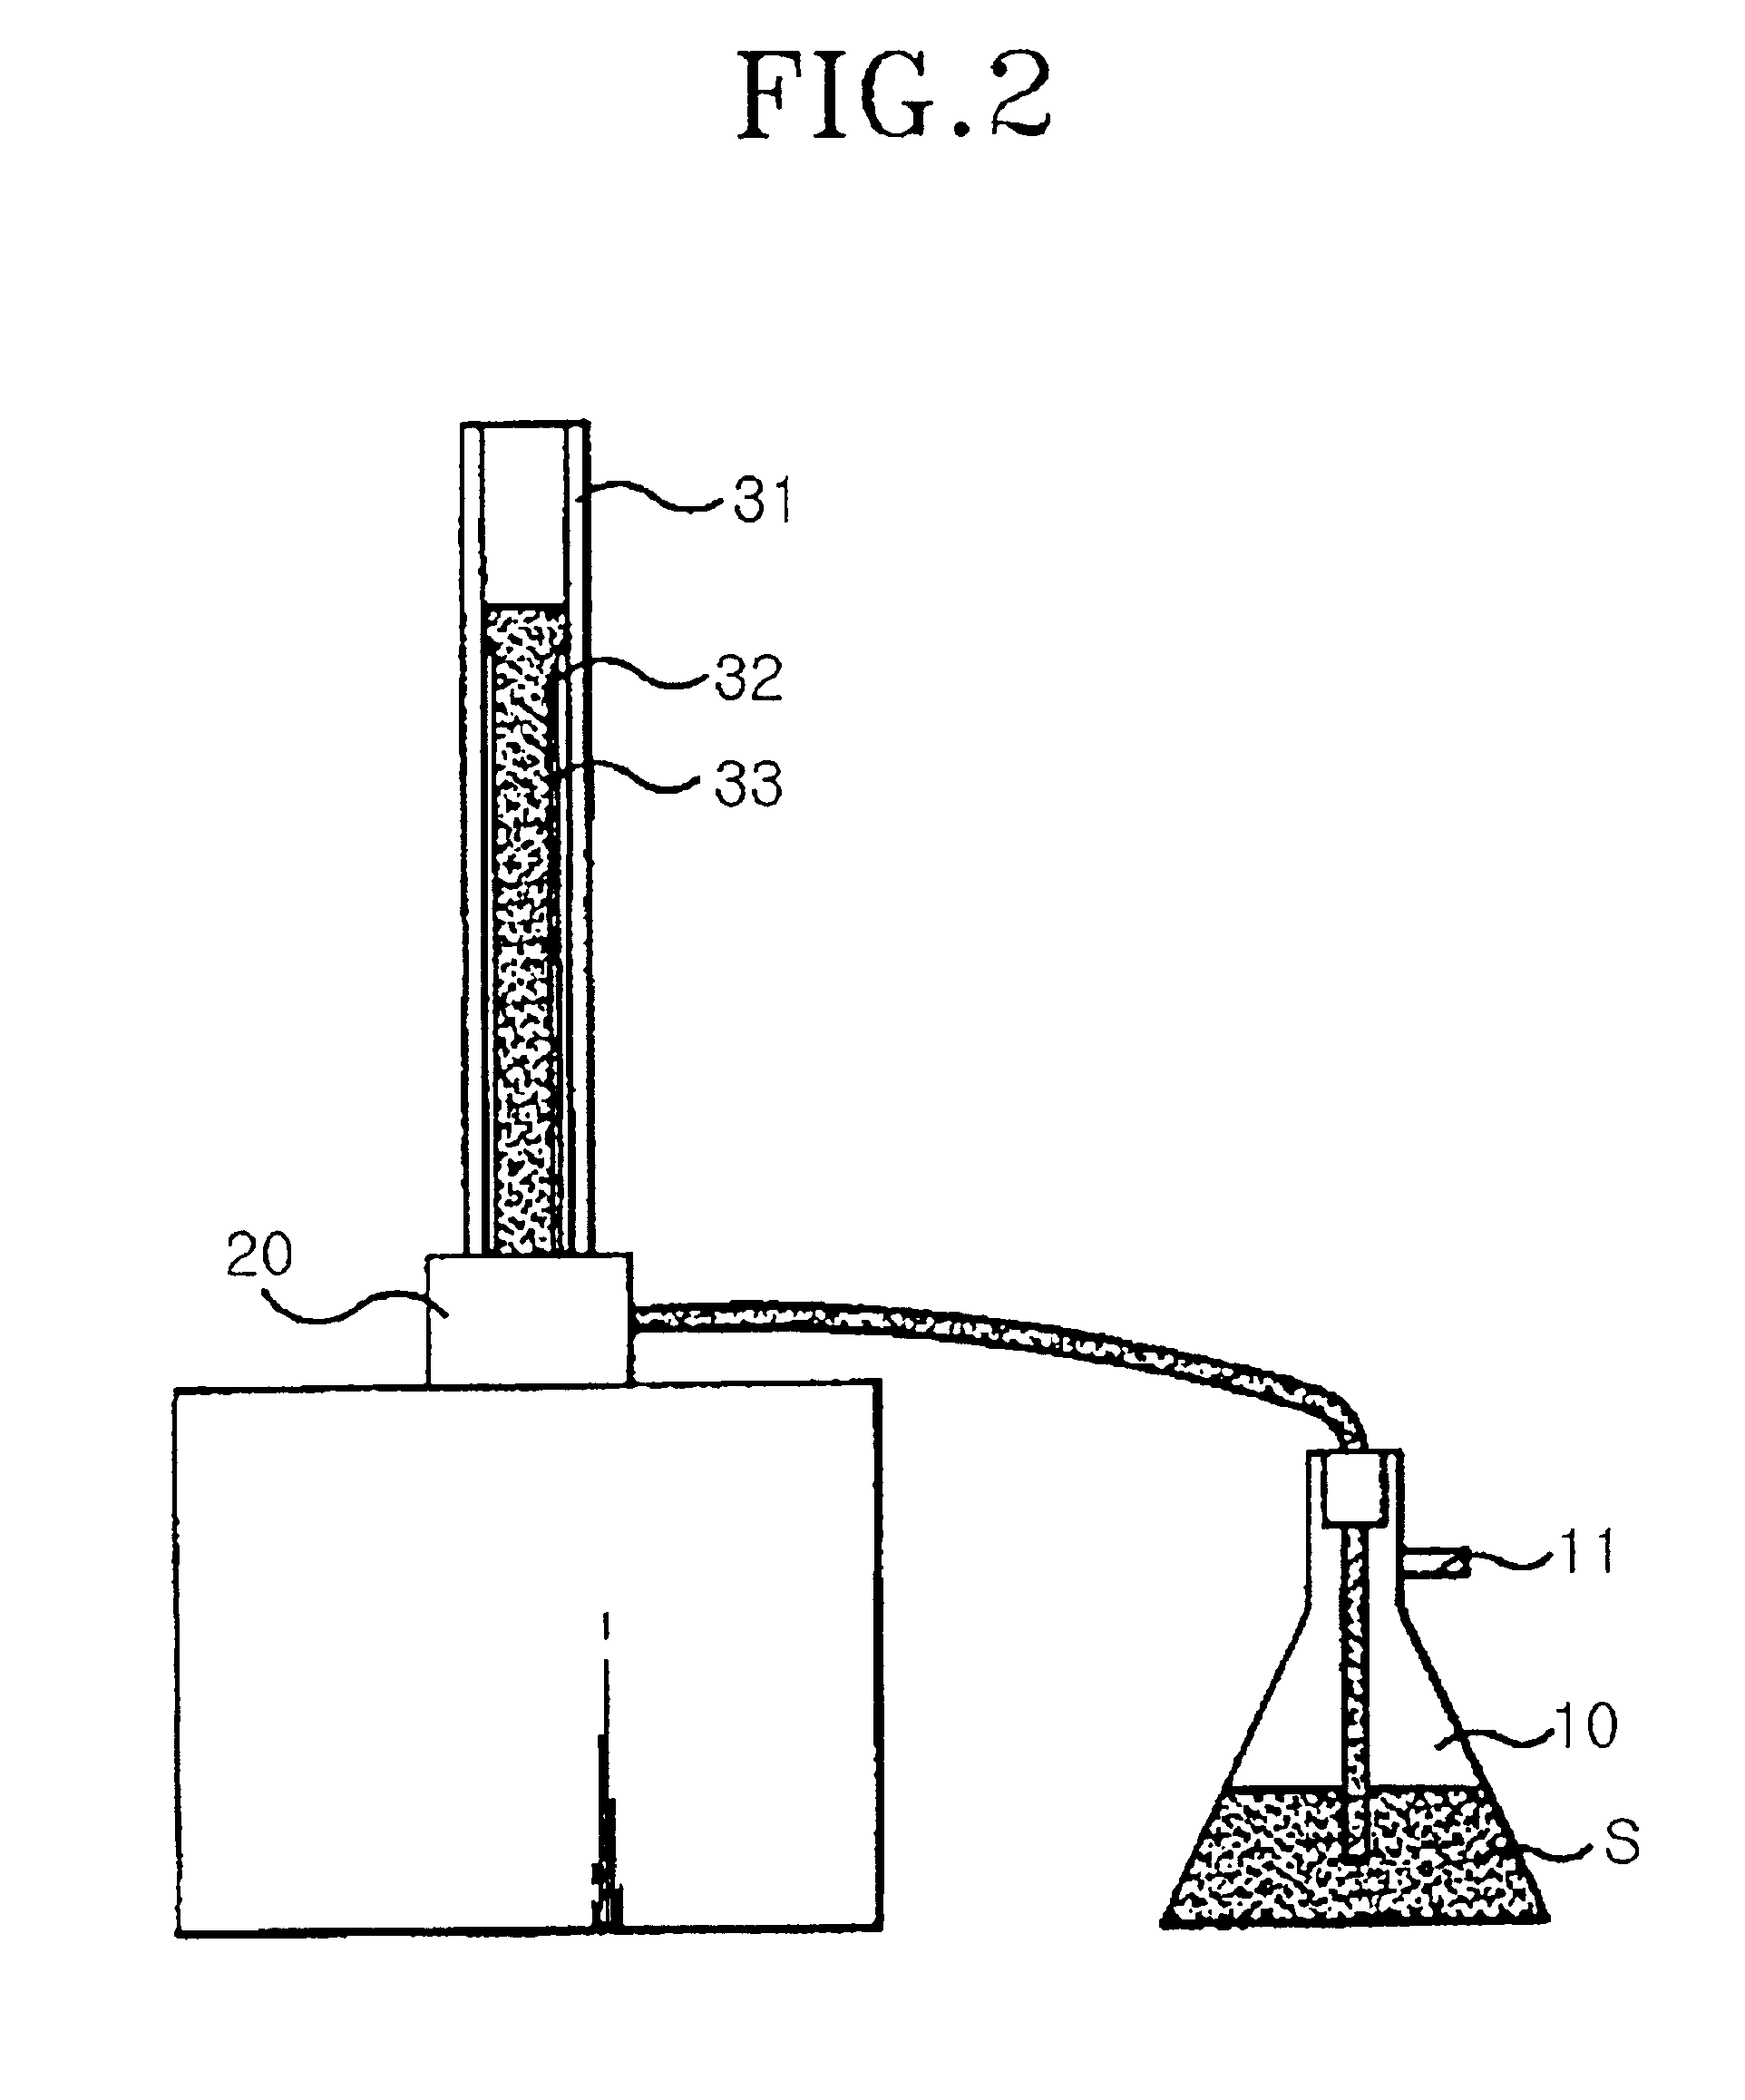 Method of fabricating an optical fiber preform using MCVD and nonlinear optical fiber fabricated using the method